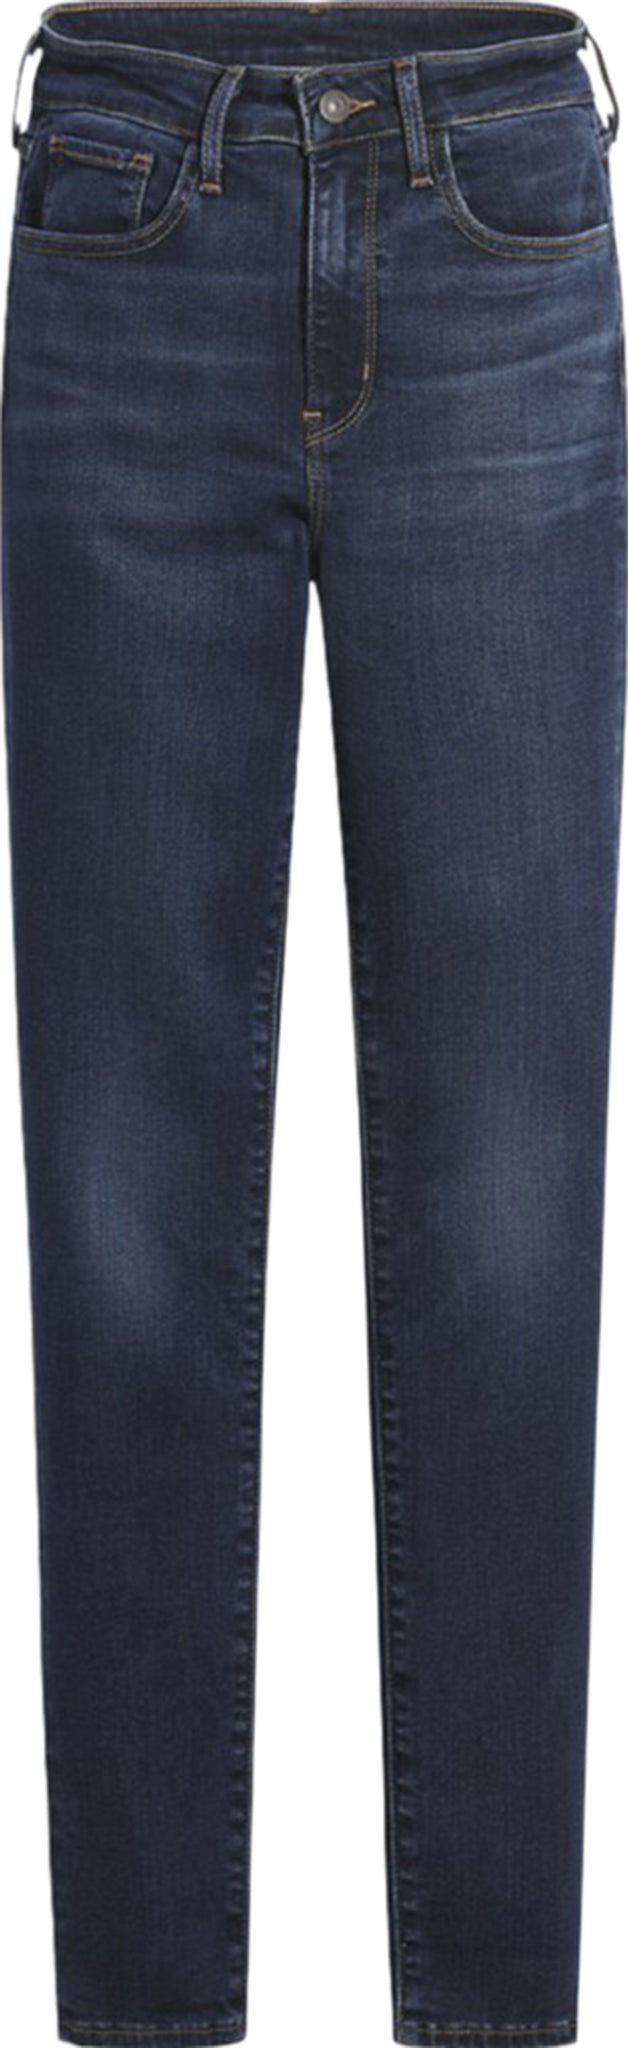 Levi's 721 High Rise Skinny Jeans - Women's | Altitude Sports